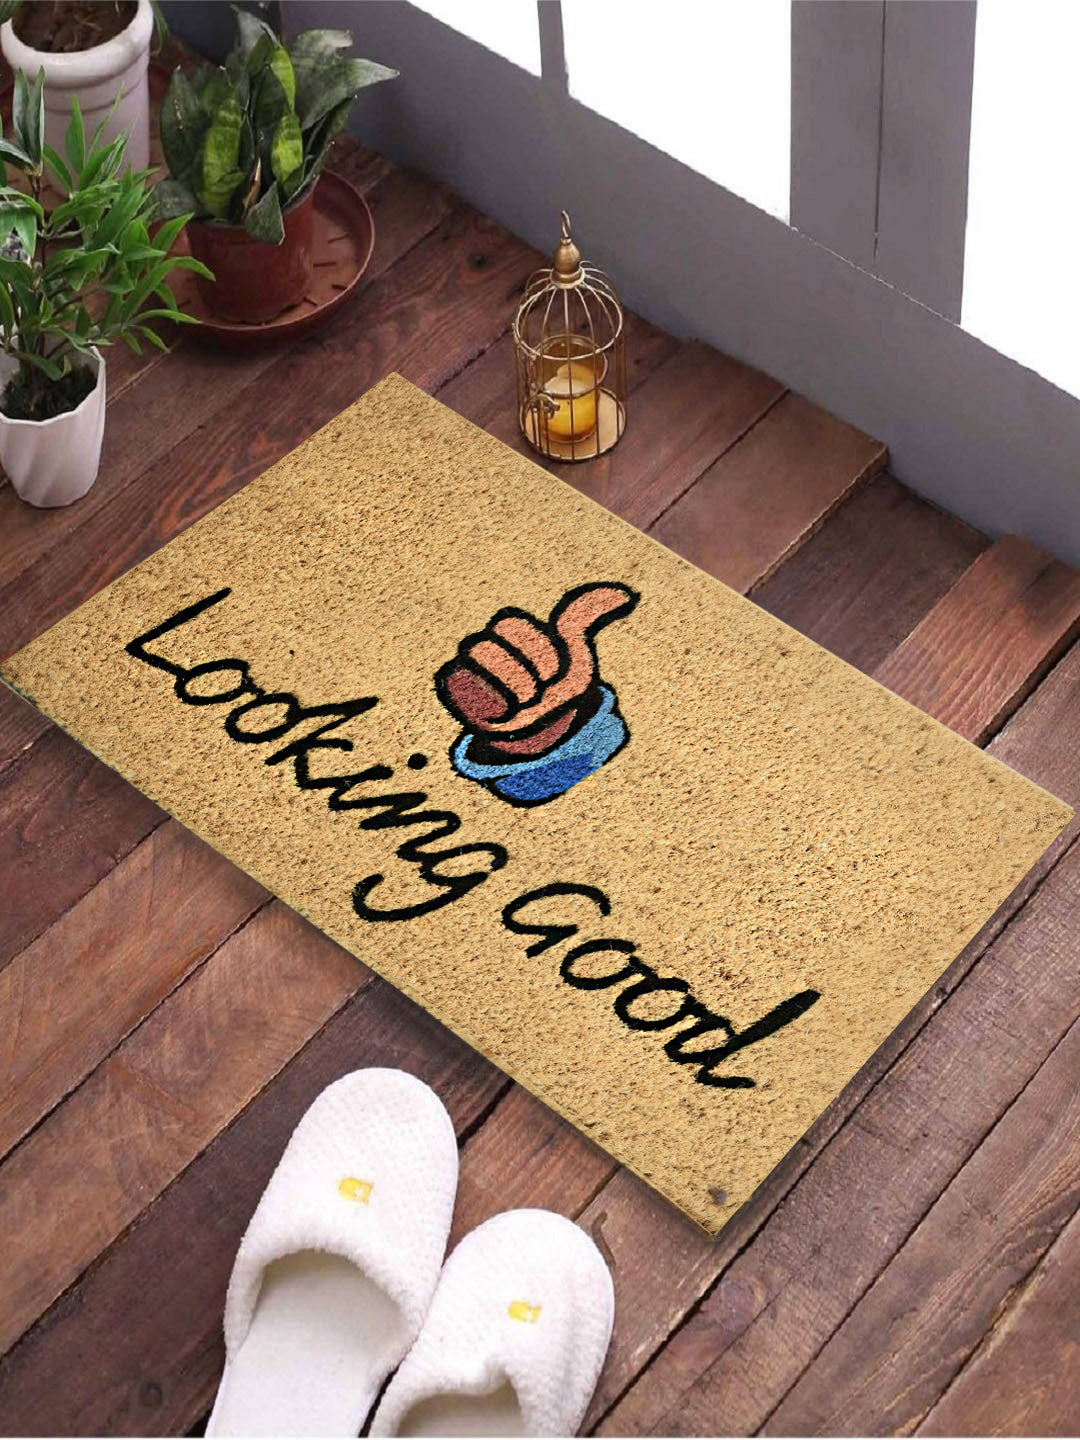 <h4>SWHF Coir Door Mat with Anti Skid Rubberized Backing: (Looking Good)</h4>